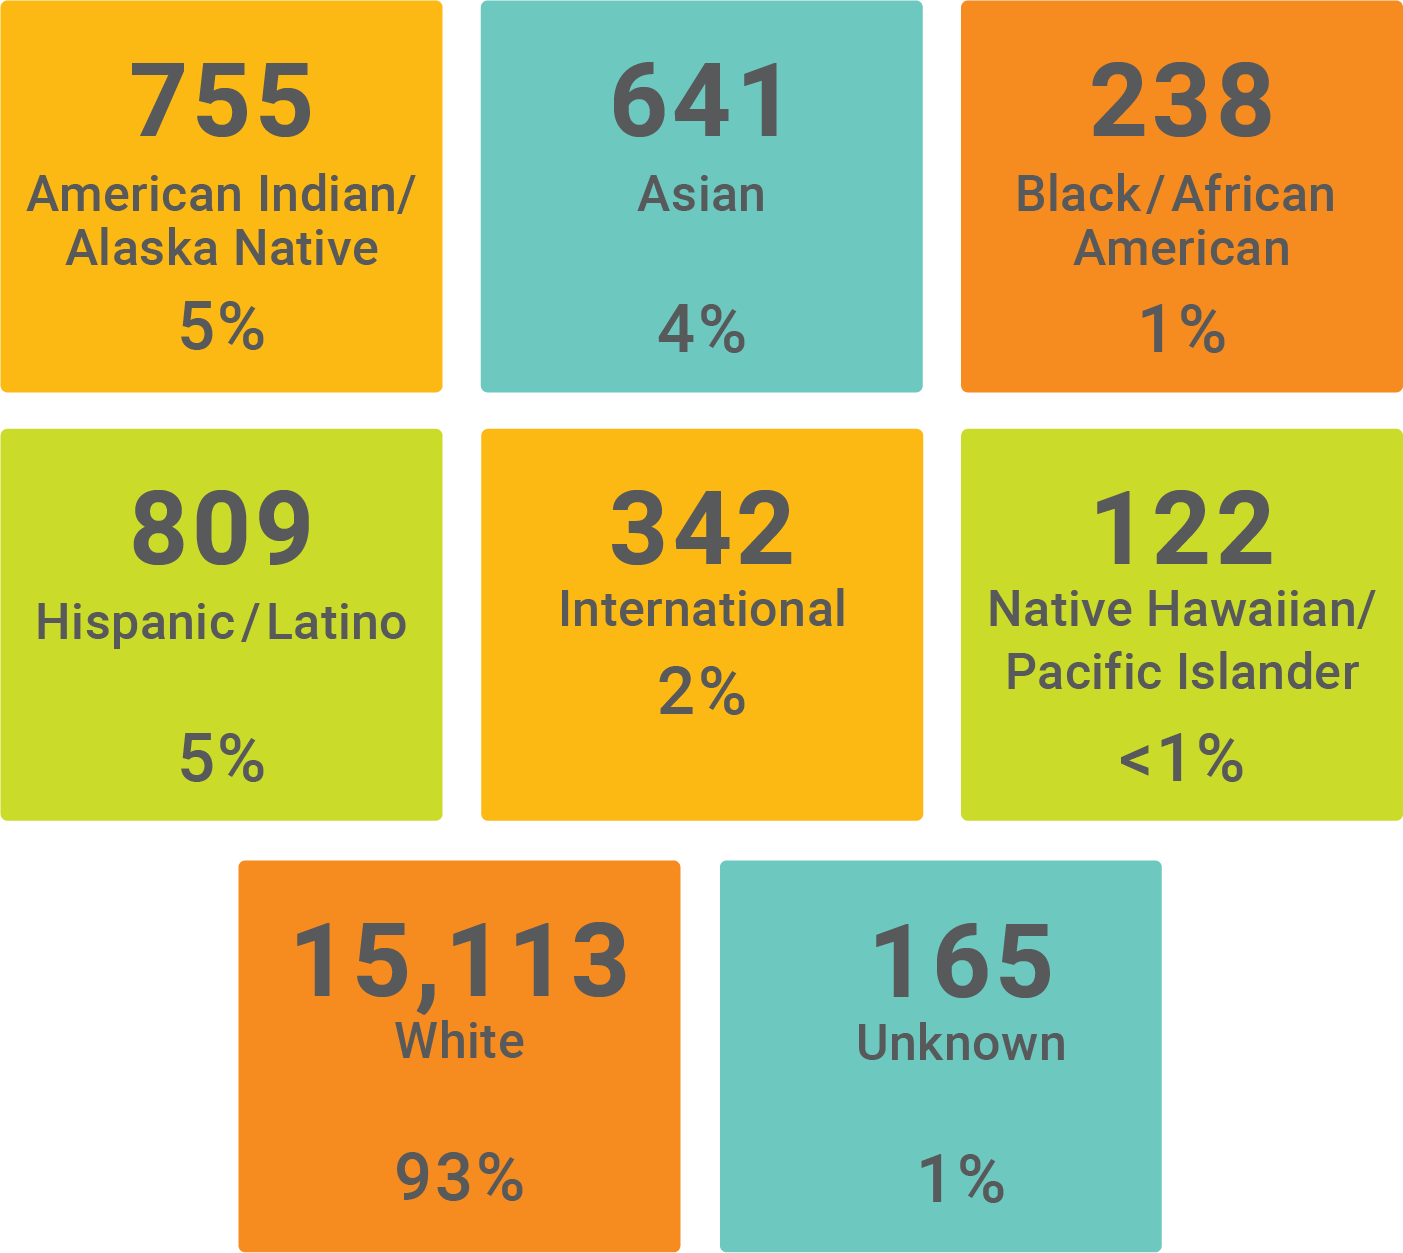 Graphic showing the demographics of students by race and ethnicity. American Indian/Alaska Native with 755 (5%), Asian with 641 at 4%, Black/African American with 238 at 1%, Hispanic/Latino with 809 at 5%, International with 342 at 2%, Native Hawaiian/Pacific Islander with 122 at less than 1%, White with 15,113 at 93%, and Unknown with 165 at 1%.